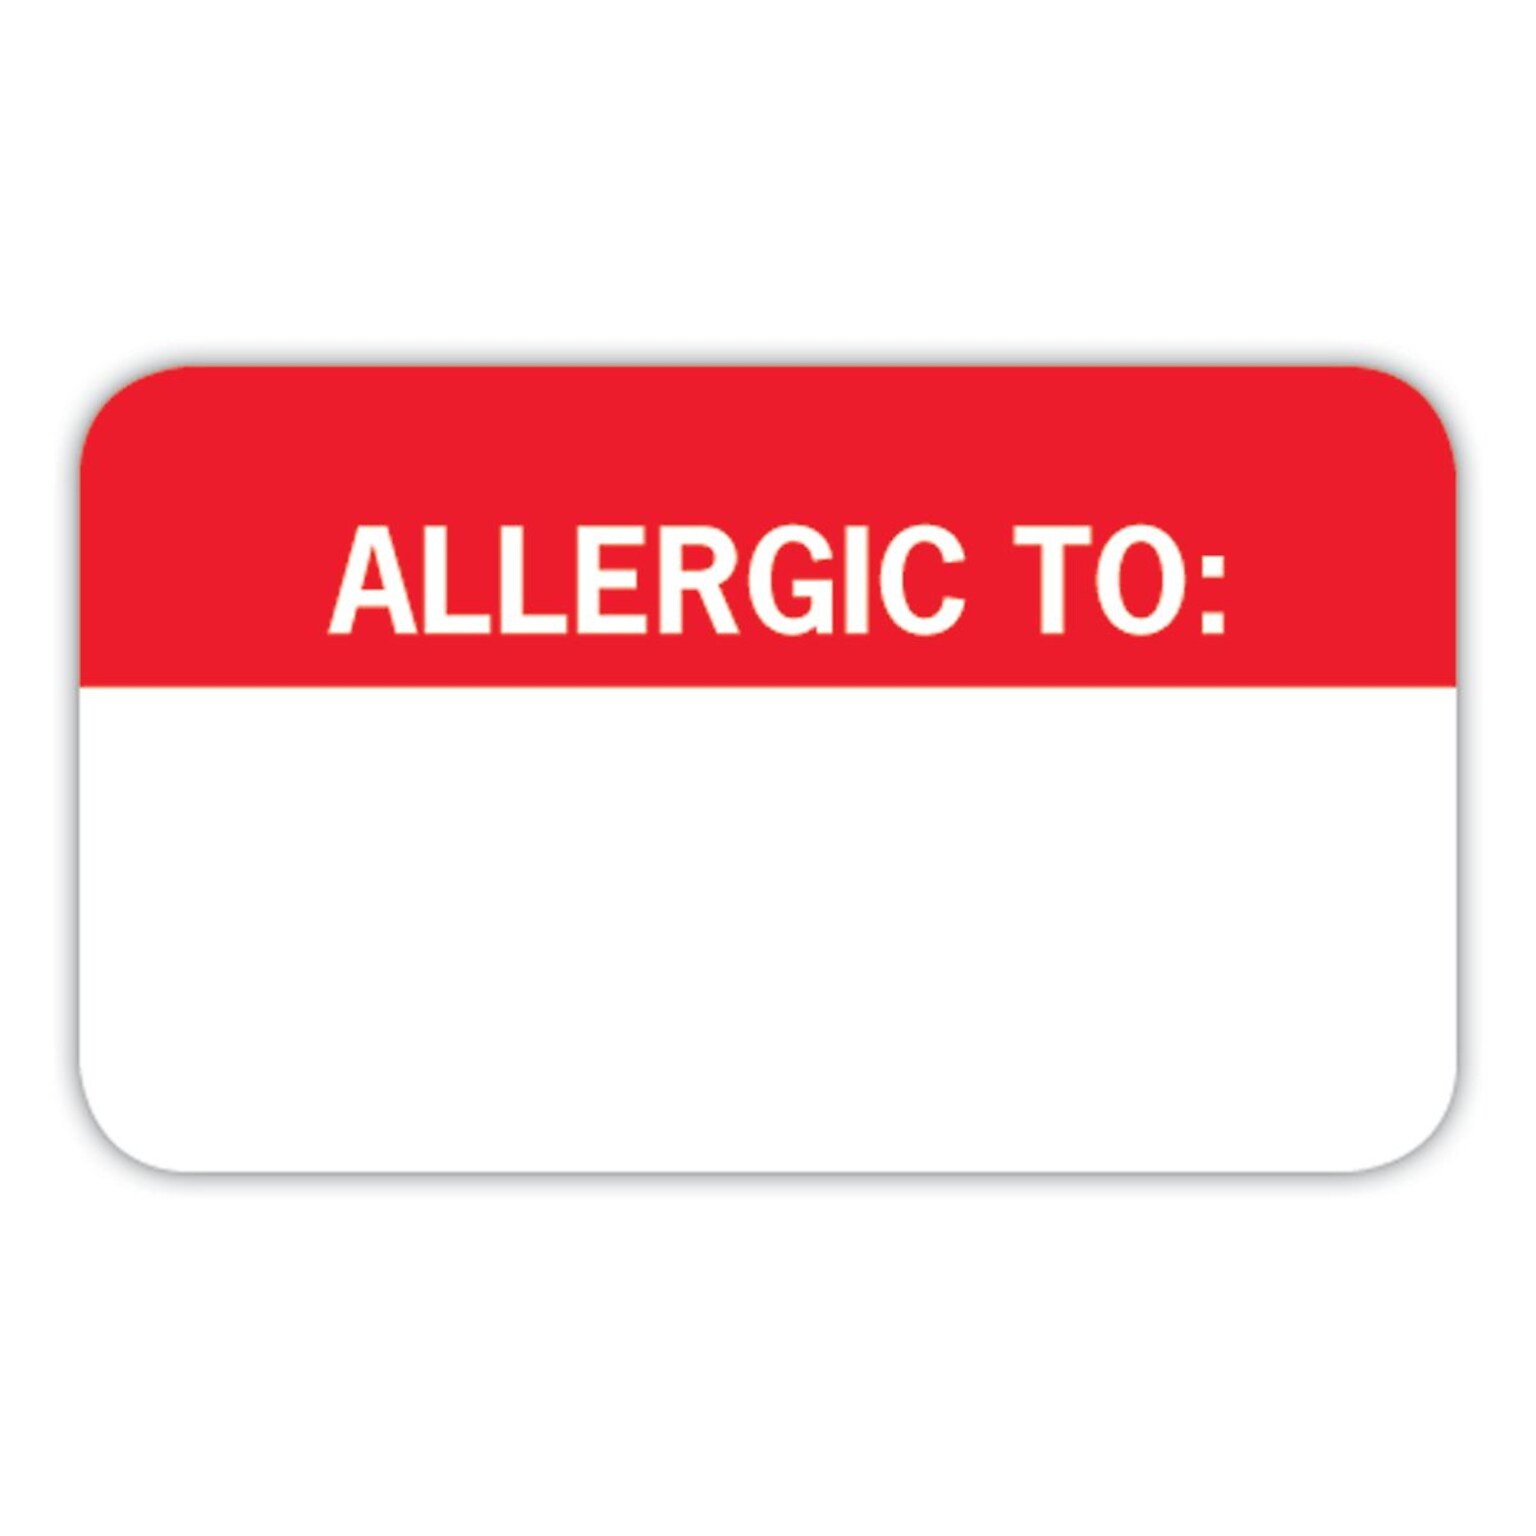 Medical Arts Press® Allergy Warning Medical Labels, Allergic To:, Red and White, 7/8x1-1/2, 250 Labels